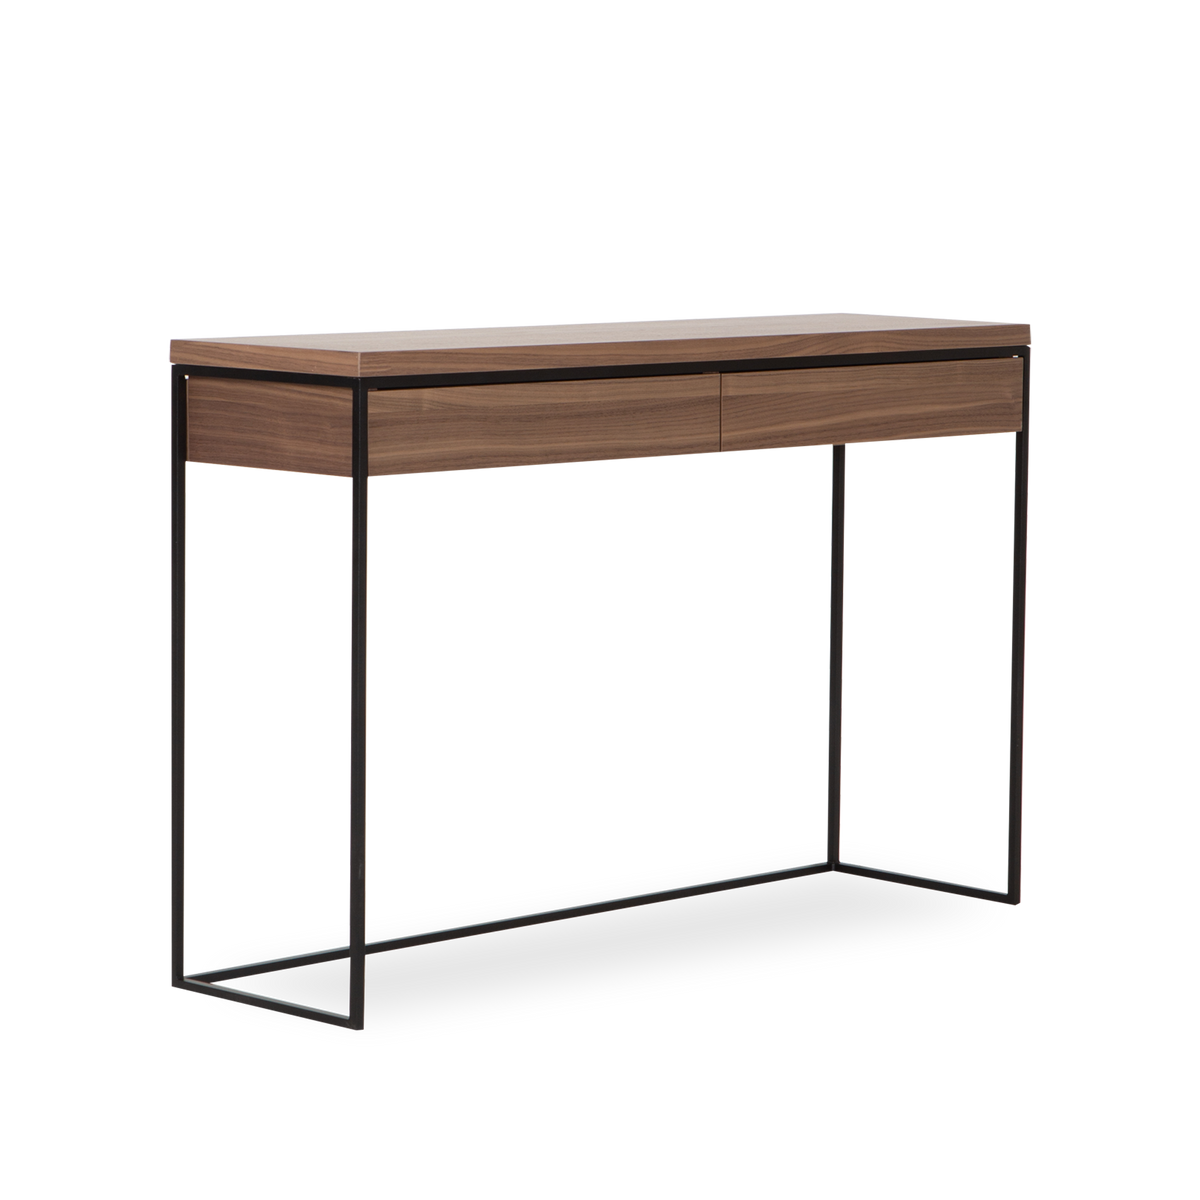 Light and airy, the Helio Console Table displays clean lines and a slim profile.